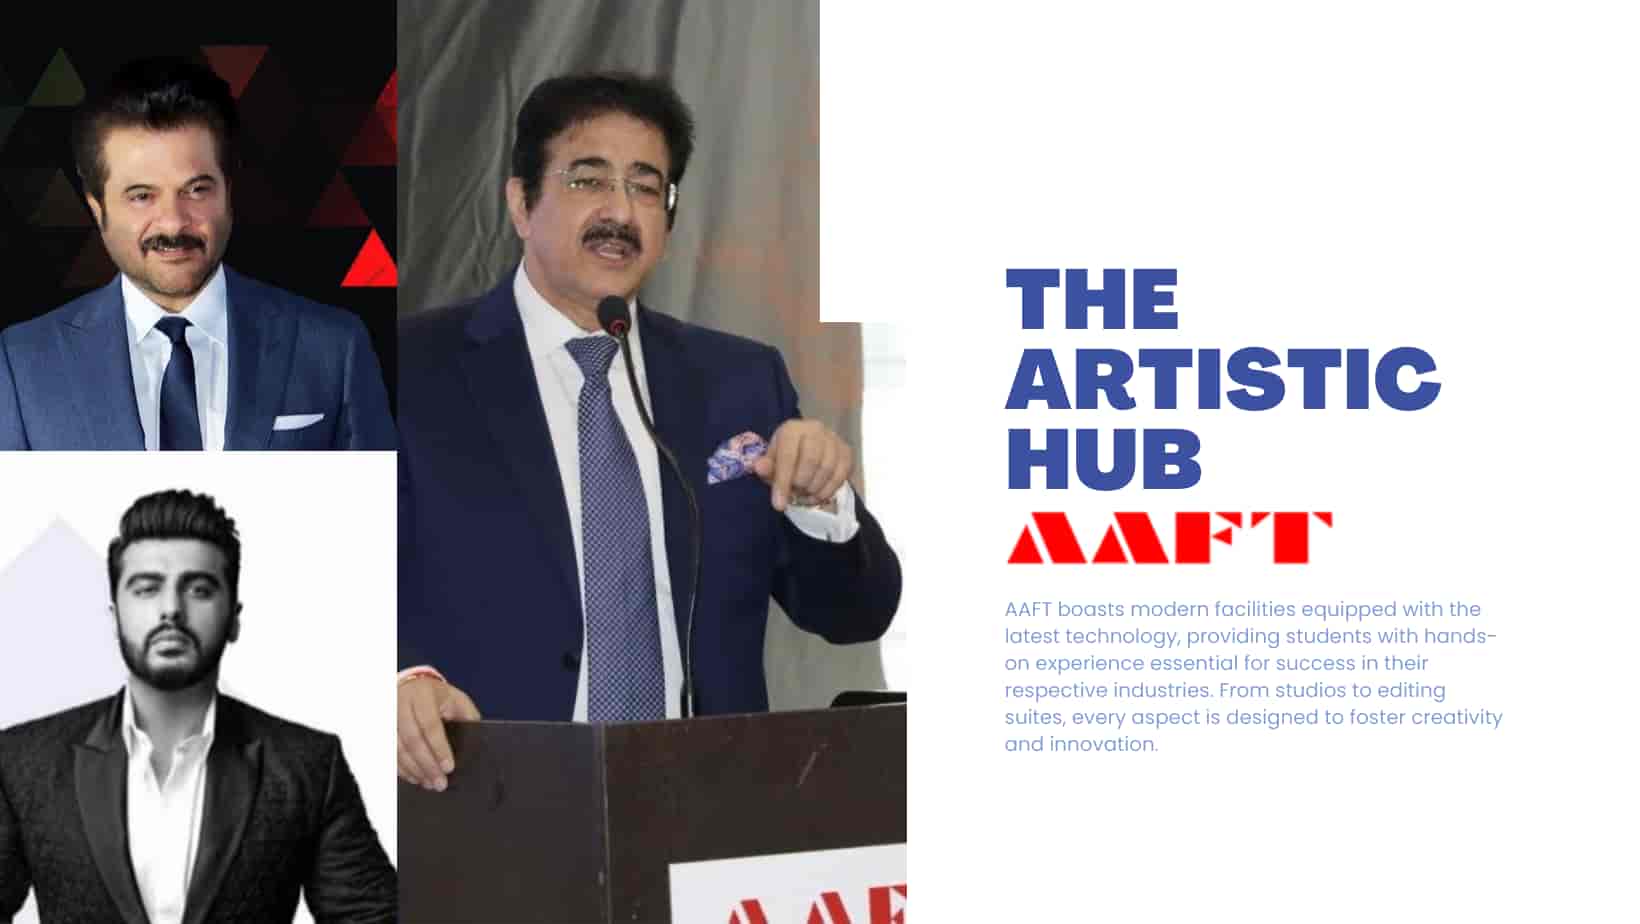 The Artistic Hub: A Overview of AAFT